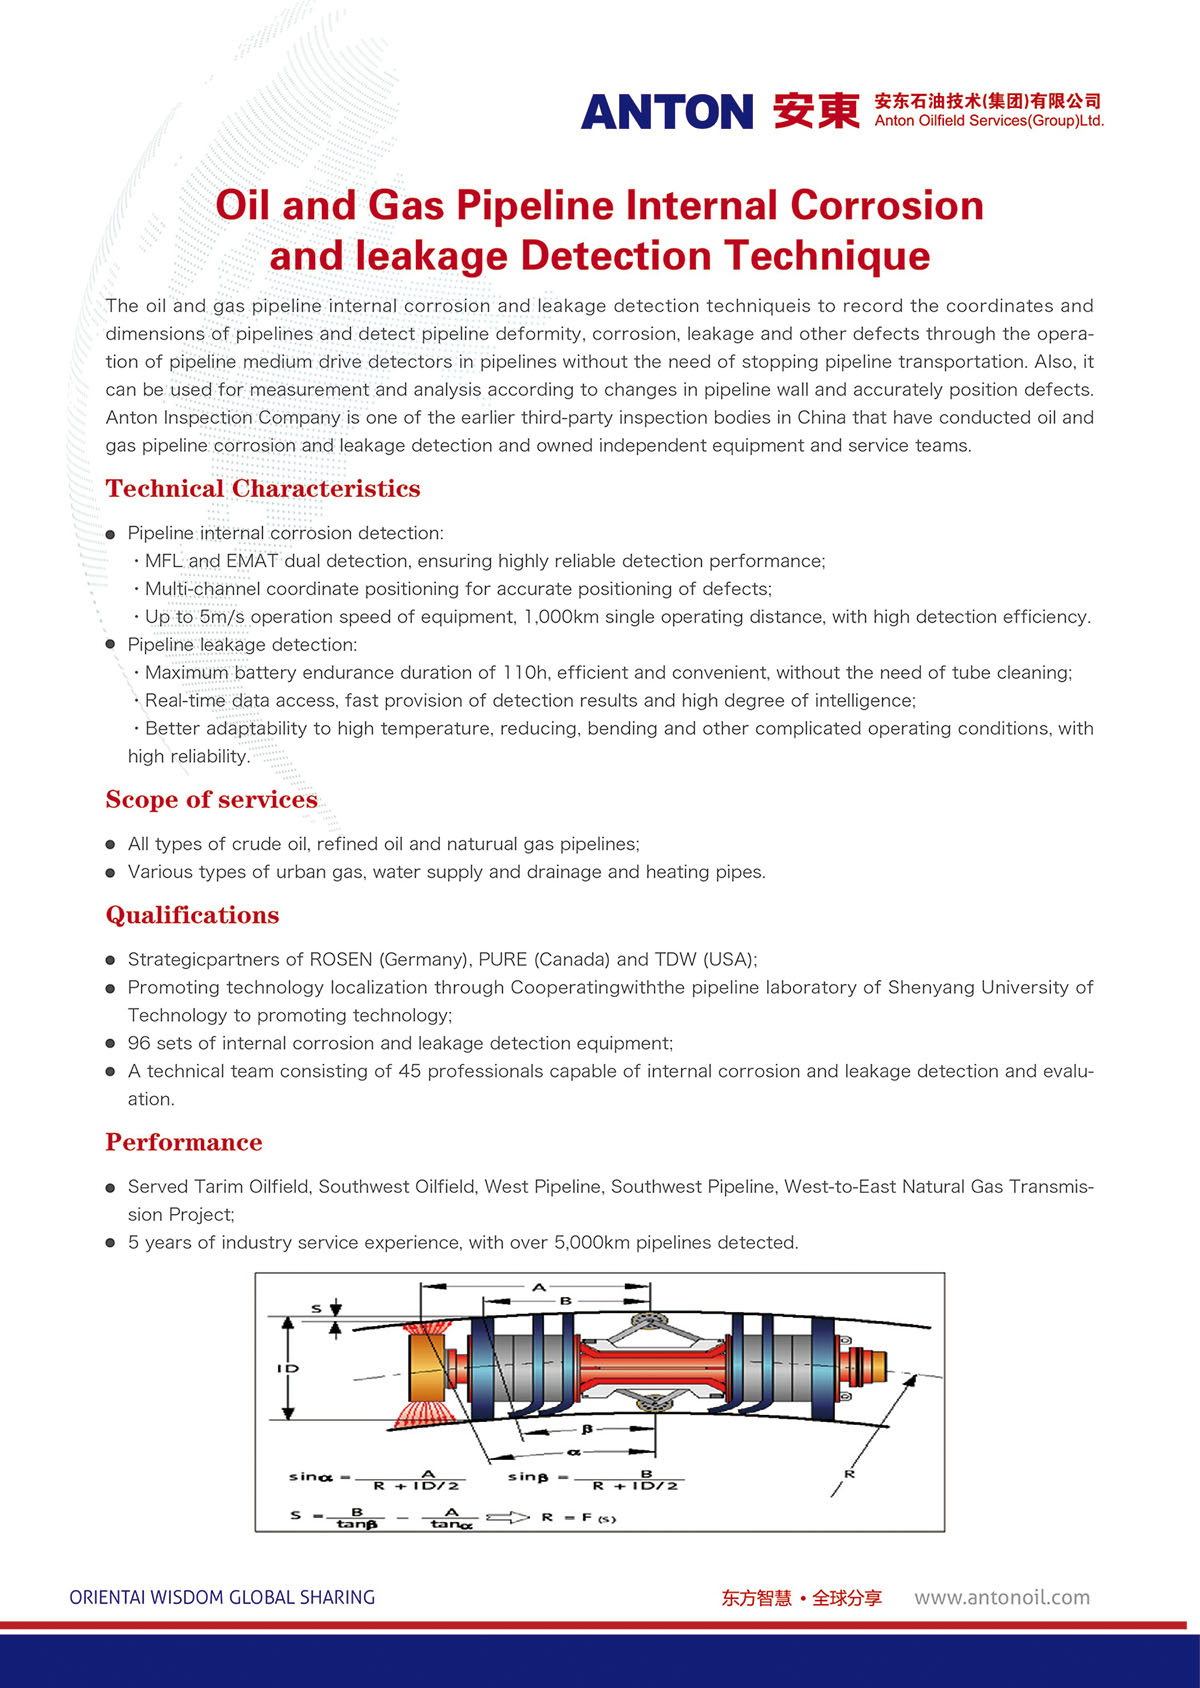 Oil and Gas Pipeline Internal Corrosion and leakage Detection Technique